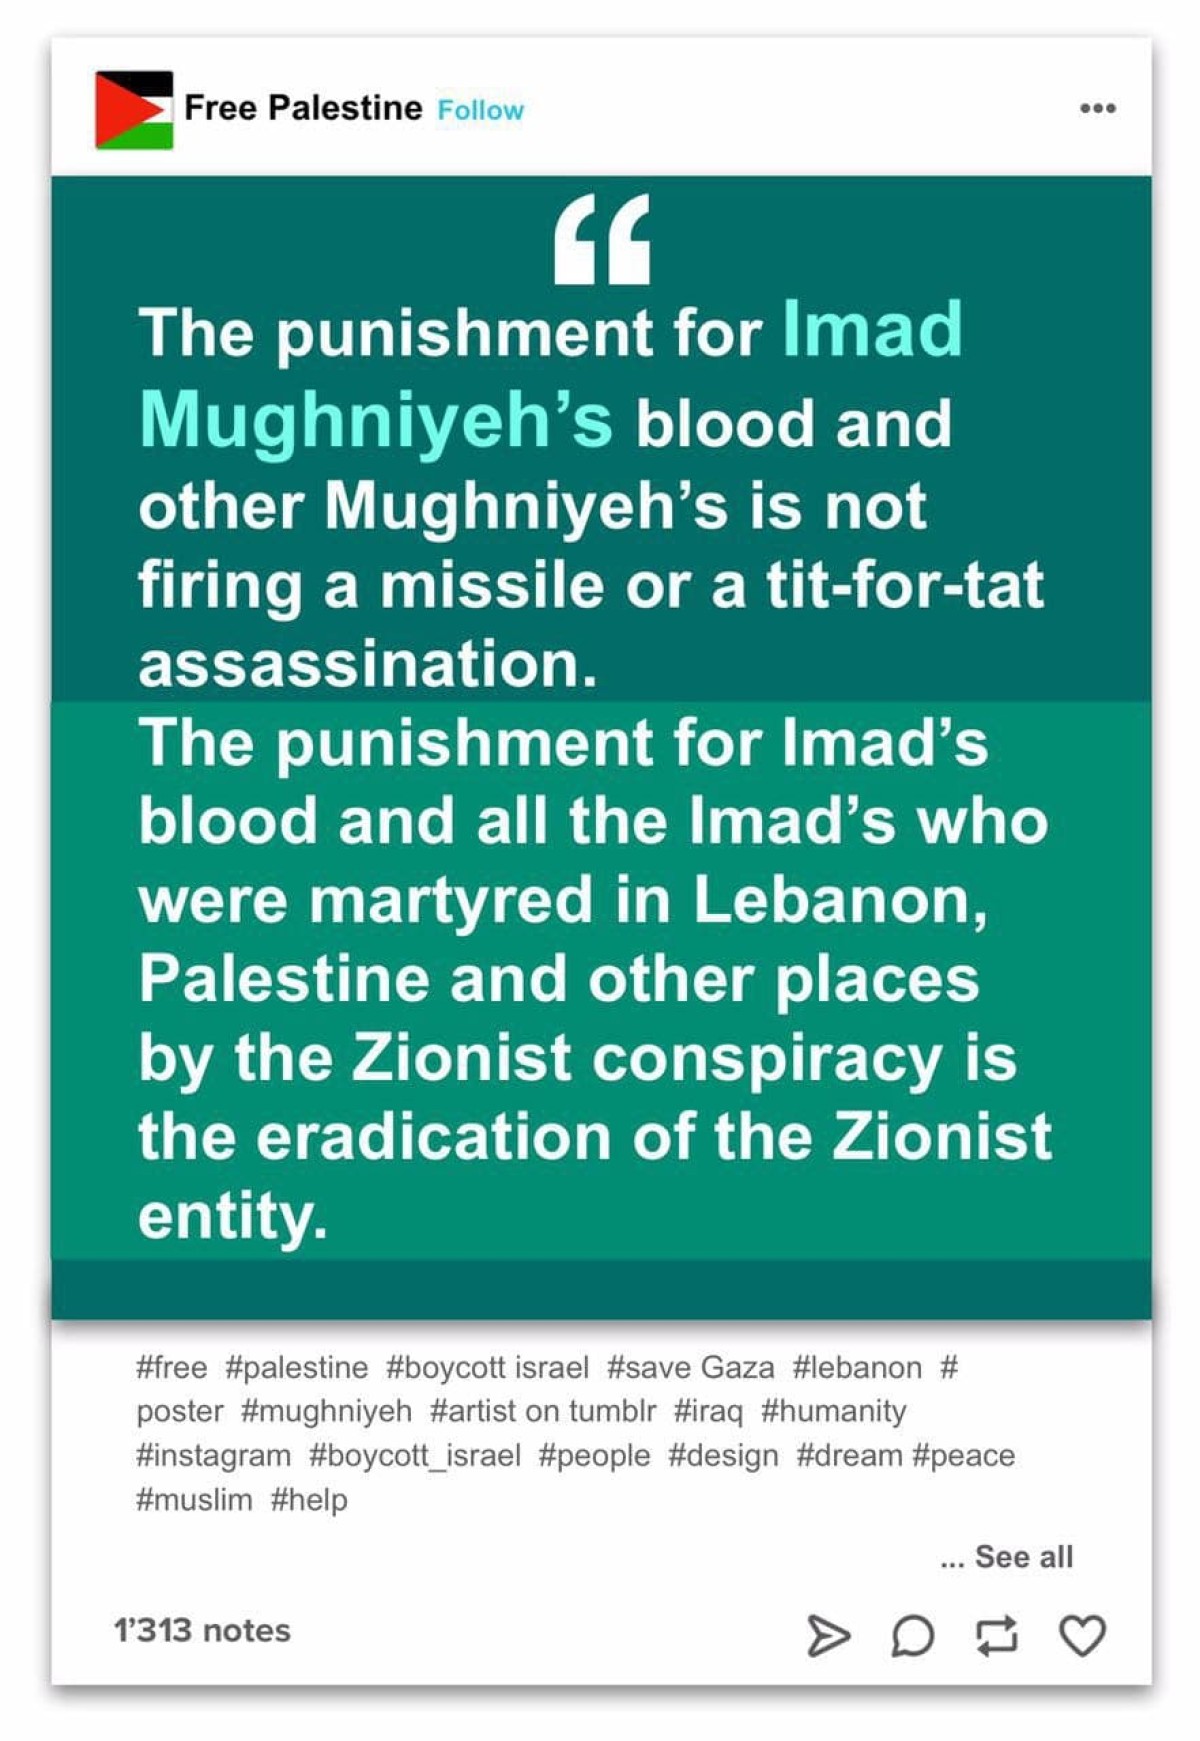 The punishment for Imad Mughniyeh’s blood and other Mughniyeh’s is not firing a missile or a tit-for-tat assassination.